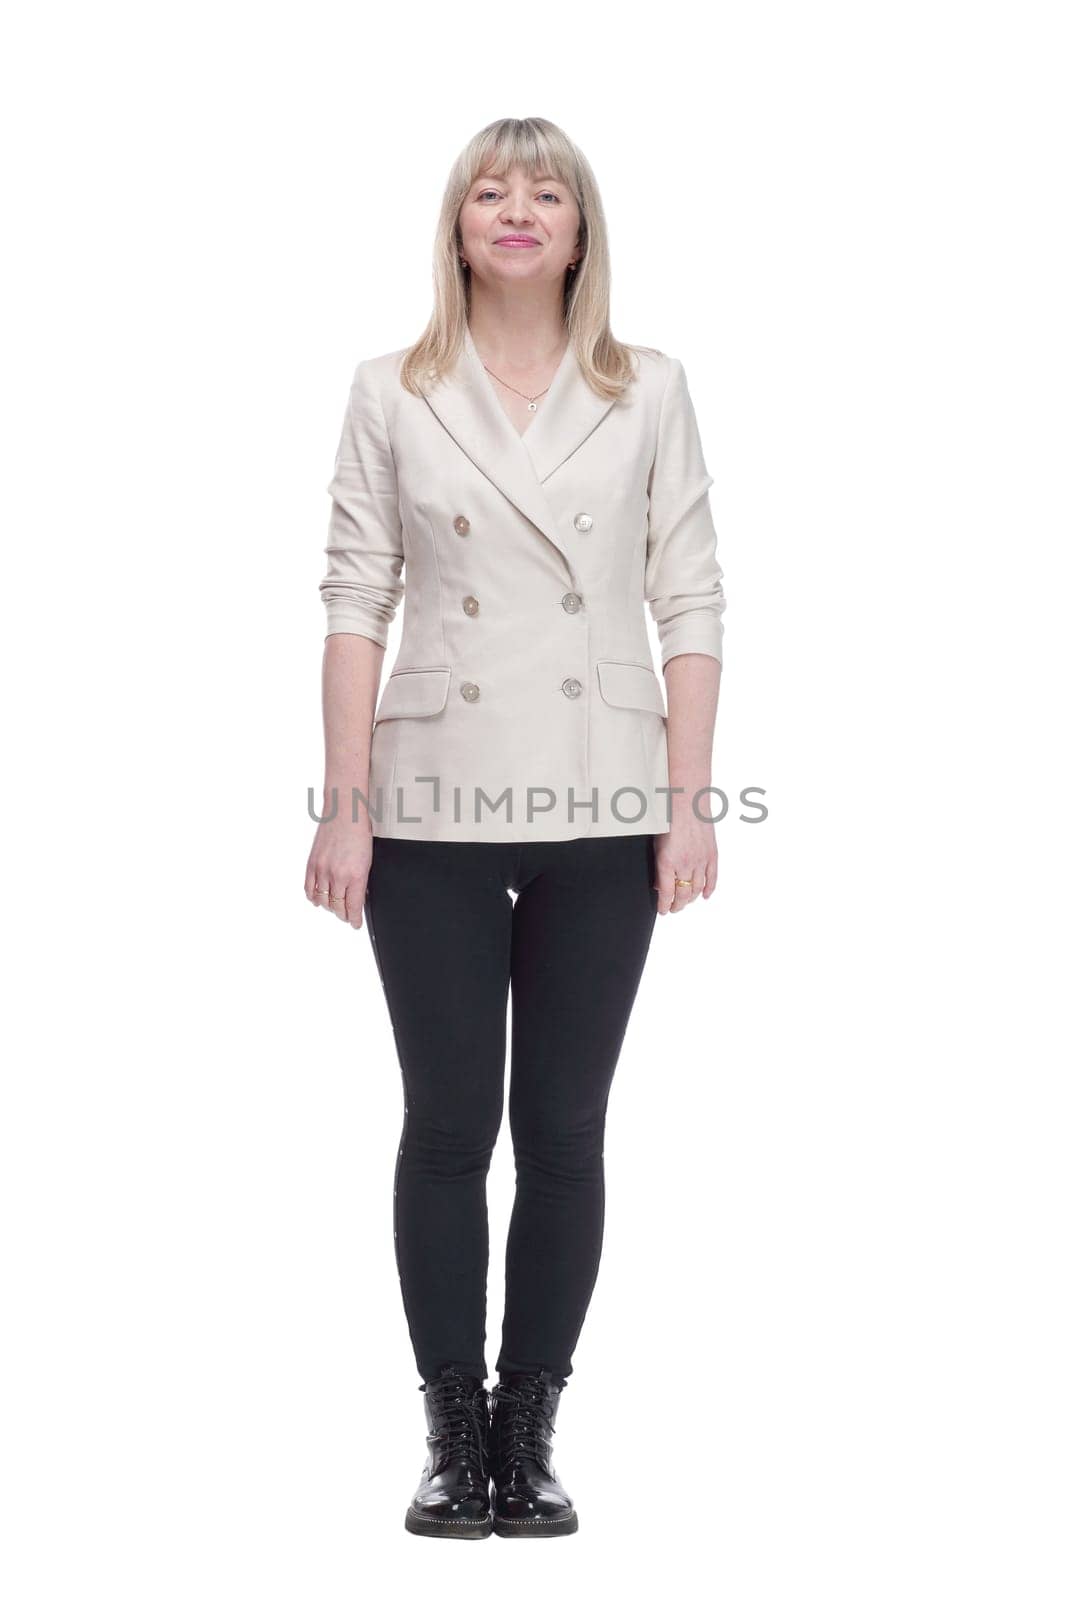 full-length. casual woman in a white jacket and black leggings. isolated on a white background.